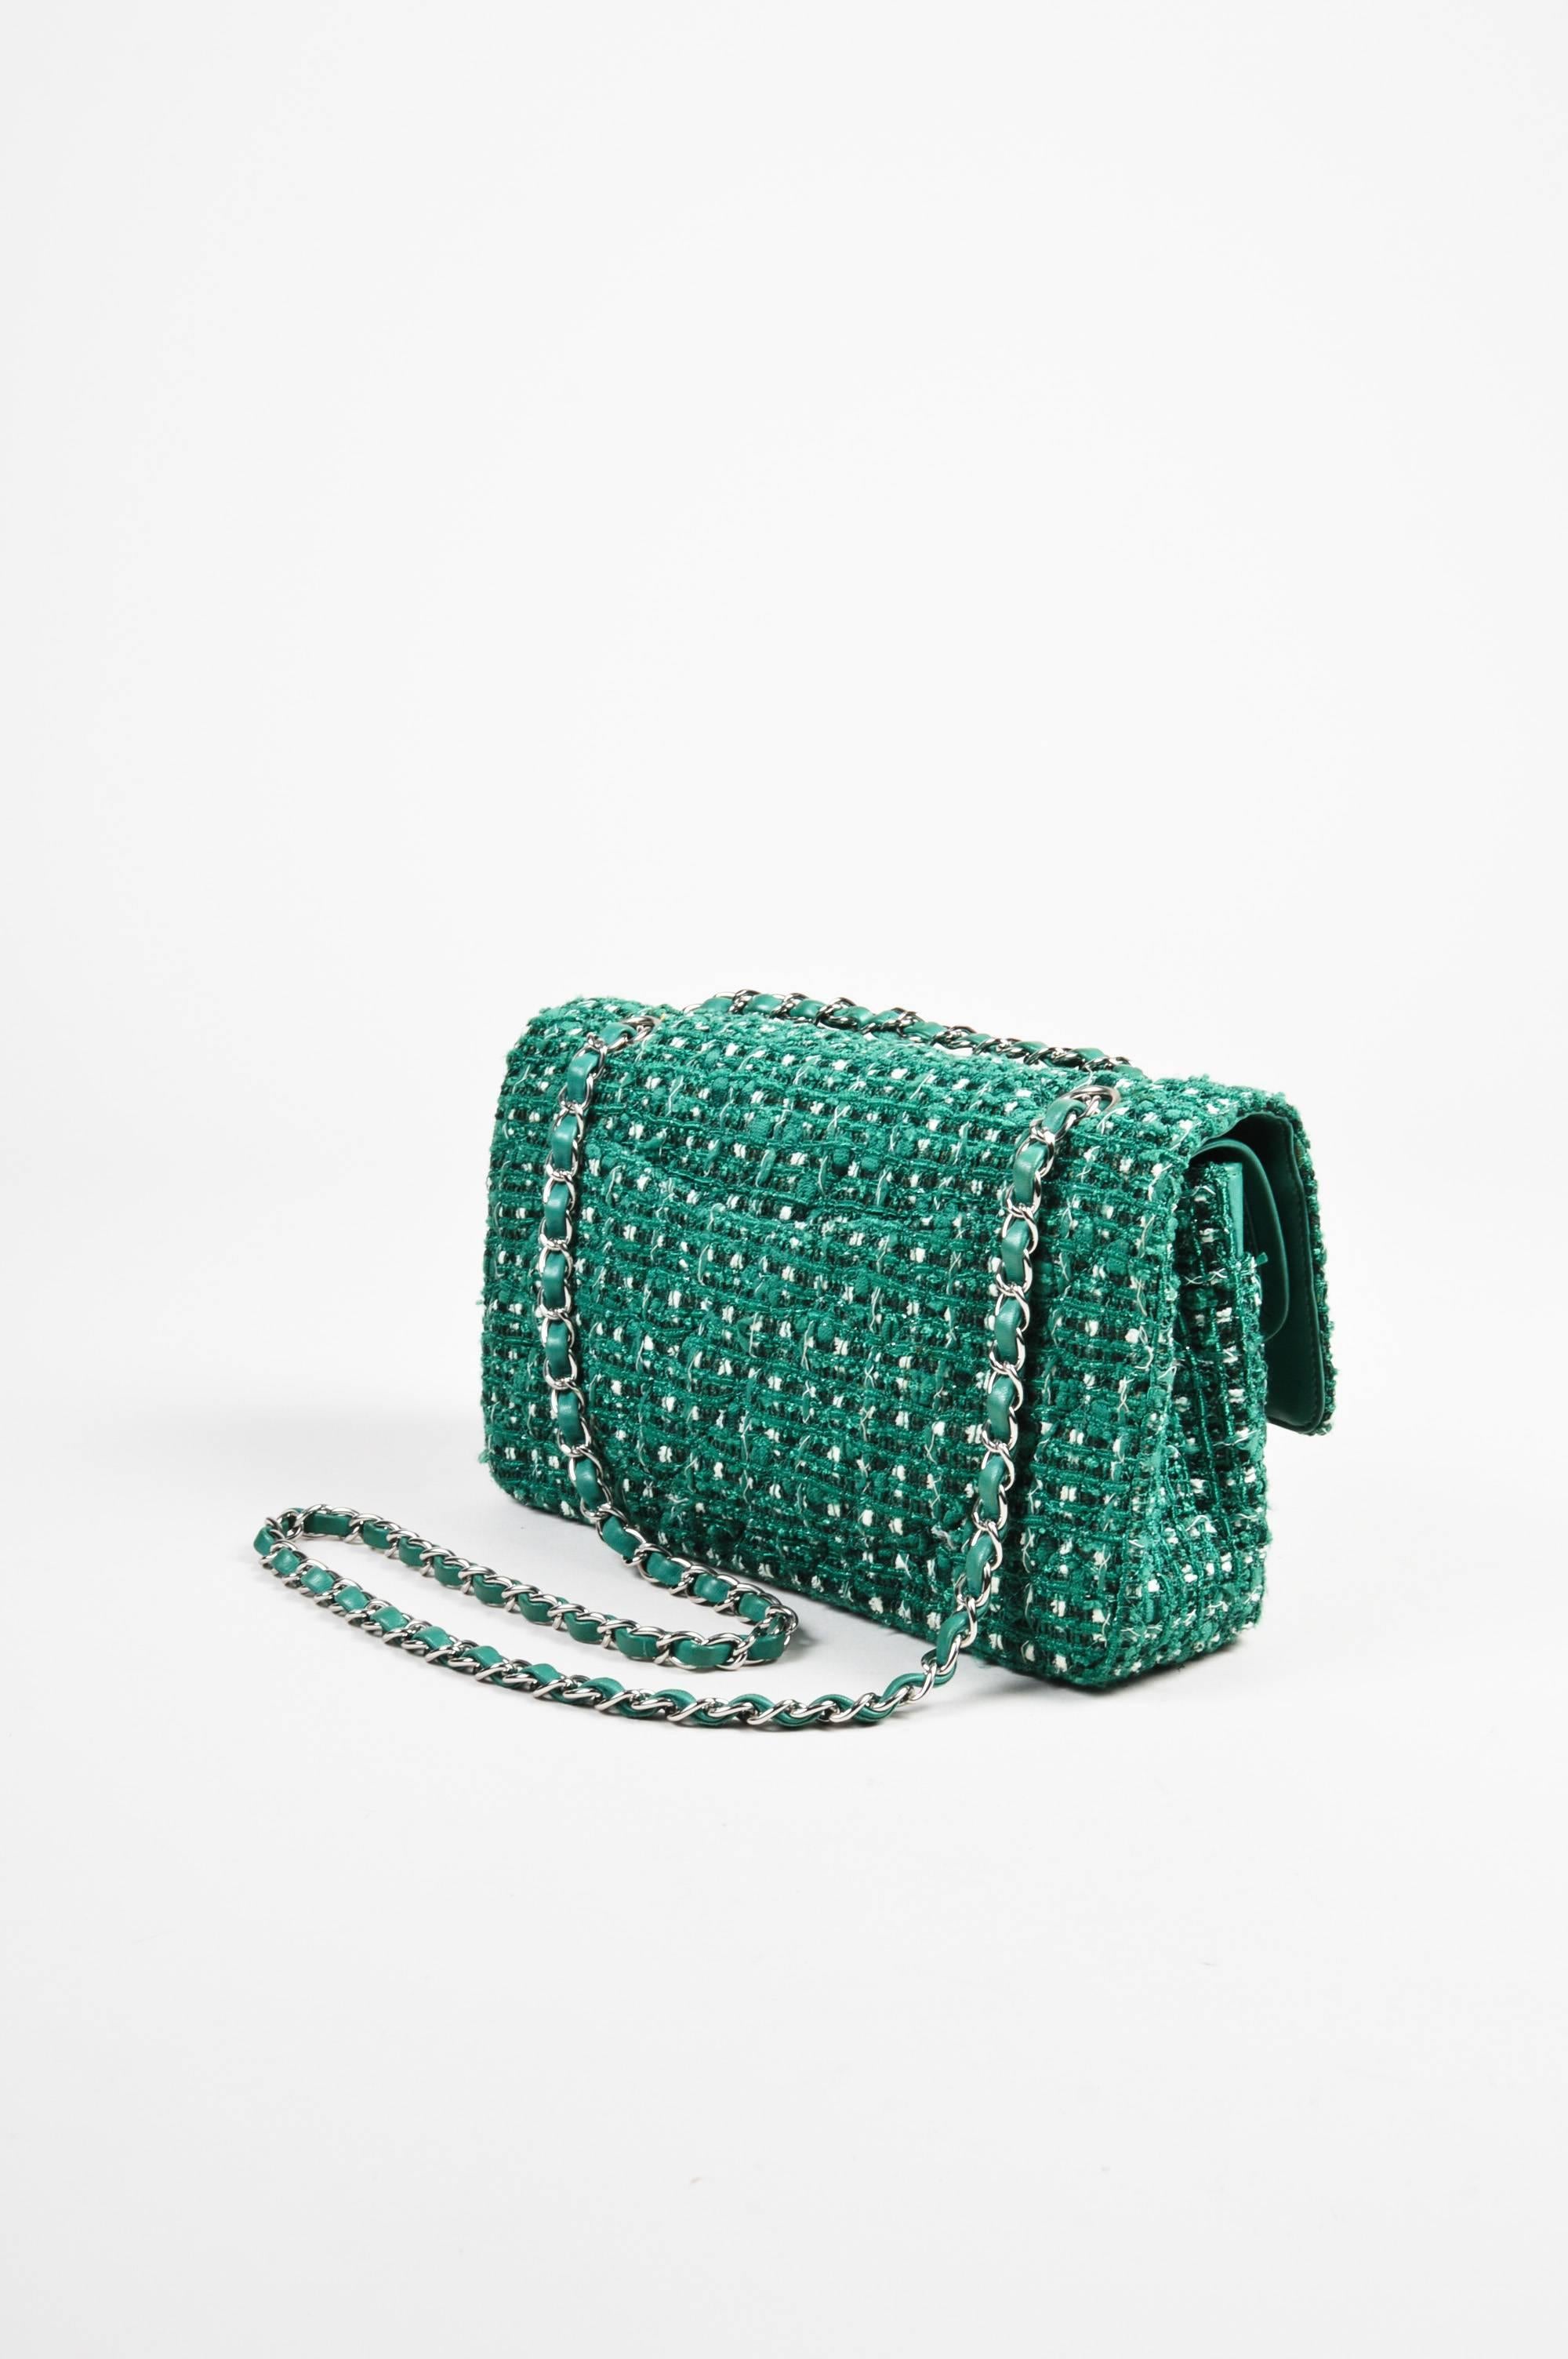 Bright and chic bag by Chanel in an iconic design. This 